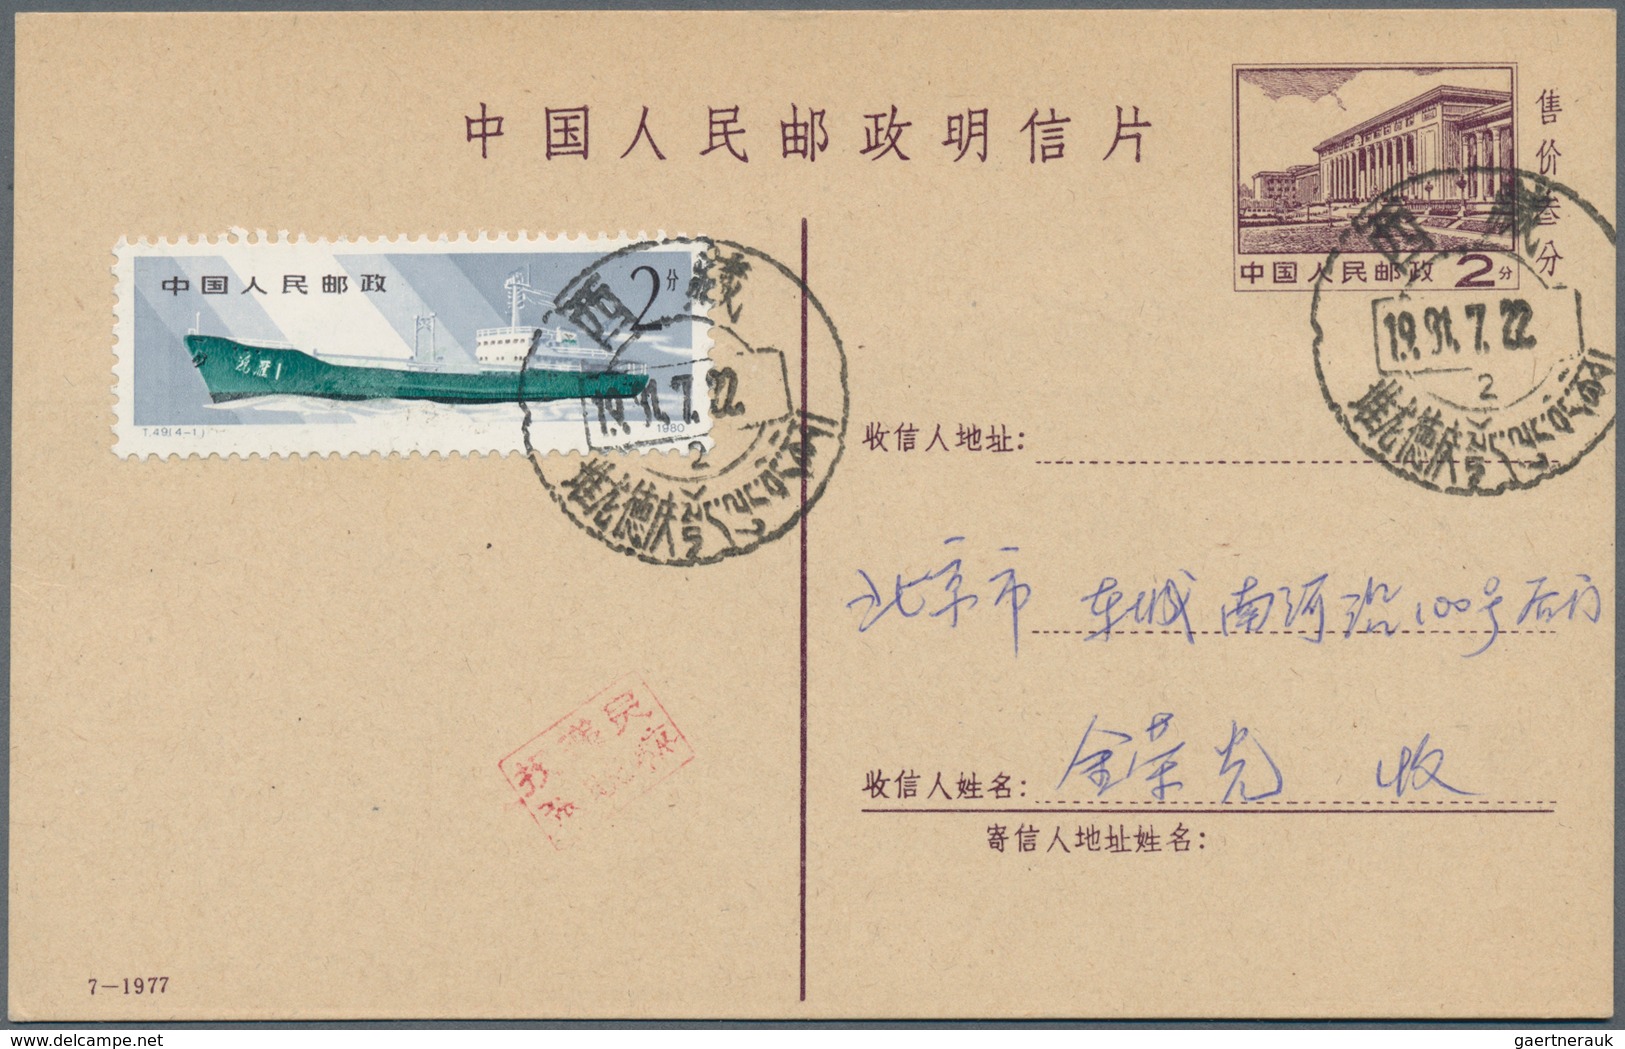 China - Volksrepublik - Ganzsachen: 1977/81, Used In Tibet, Card 2 F. Uprated To Peking: 7-1977 By 1 - Cartes Postales